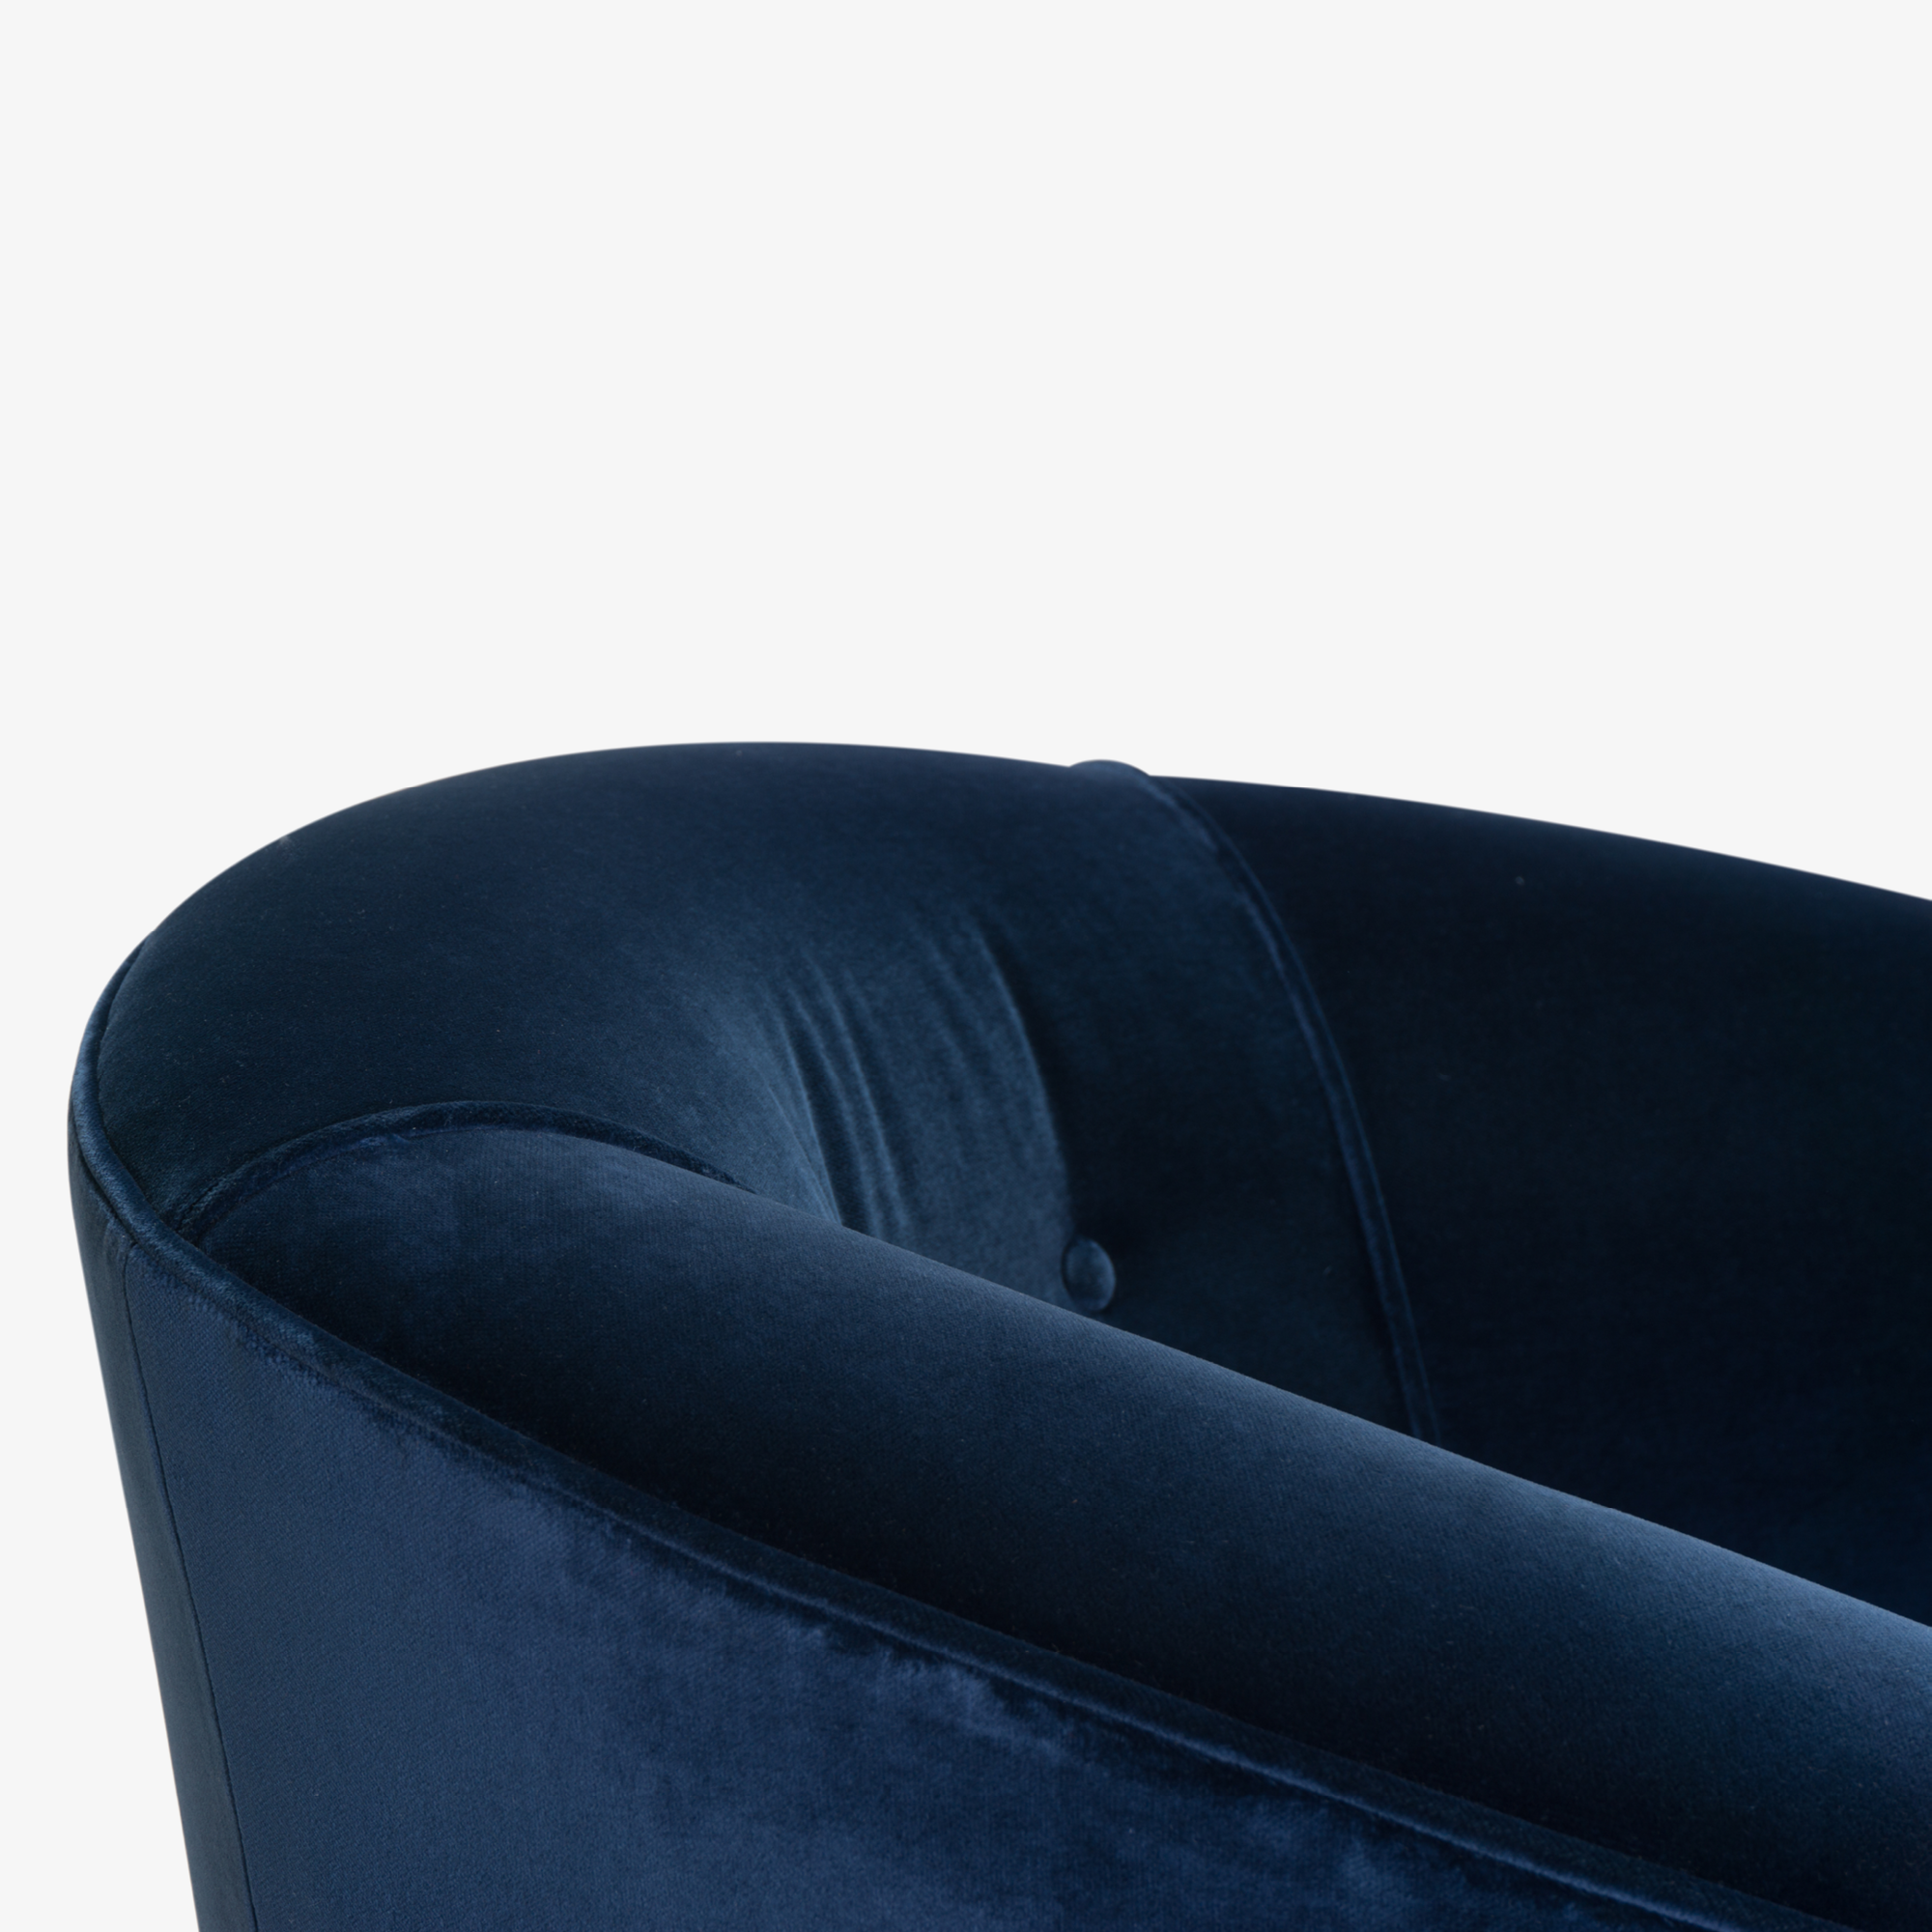 Swivel Tub Chairs in Navy Velvet with Polished Brass Bases, Pair7.png